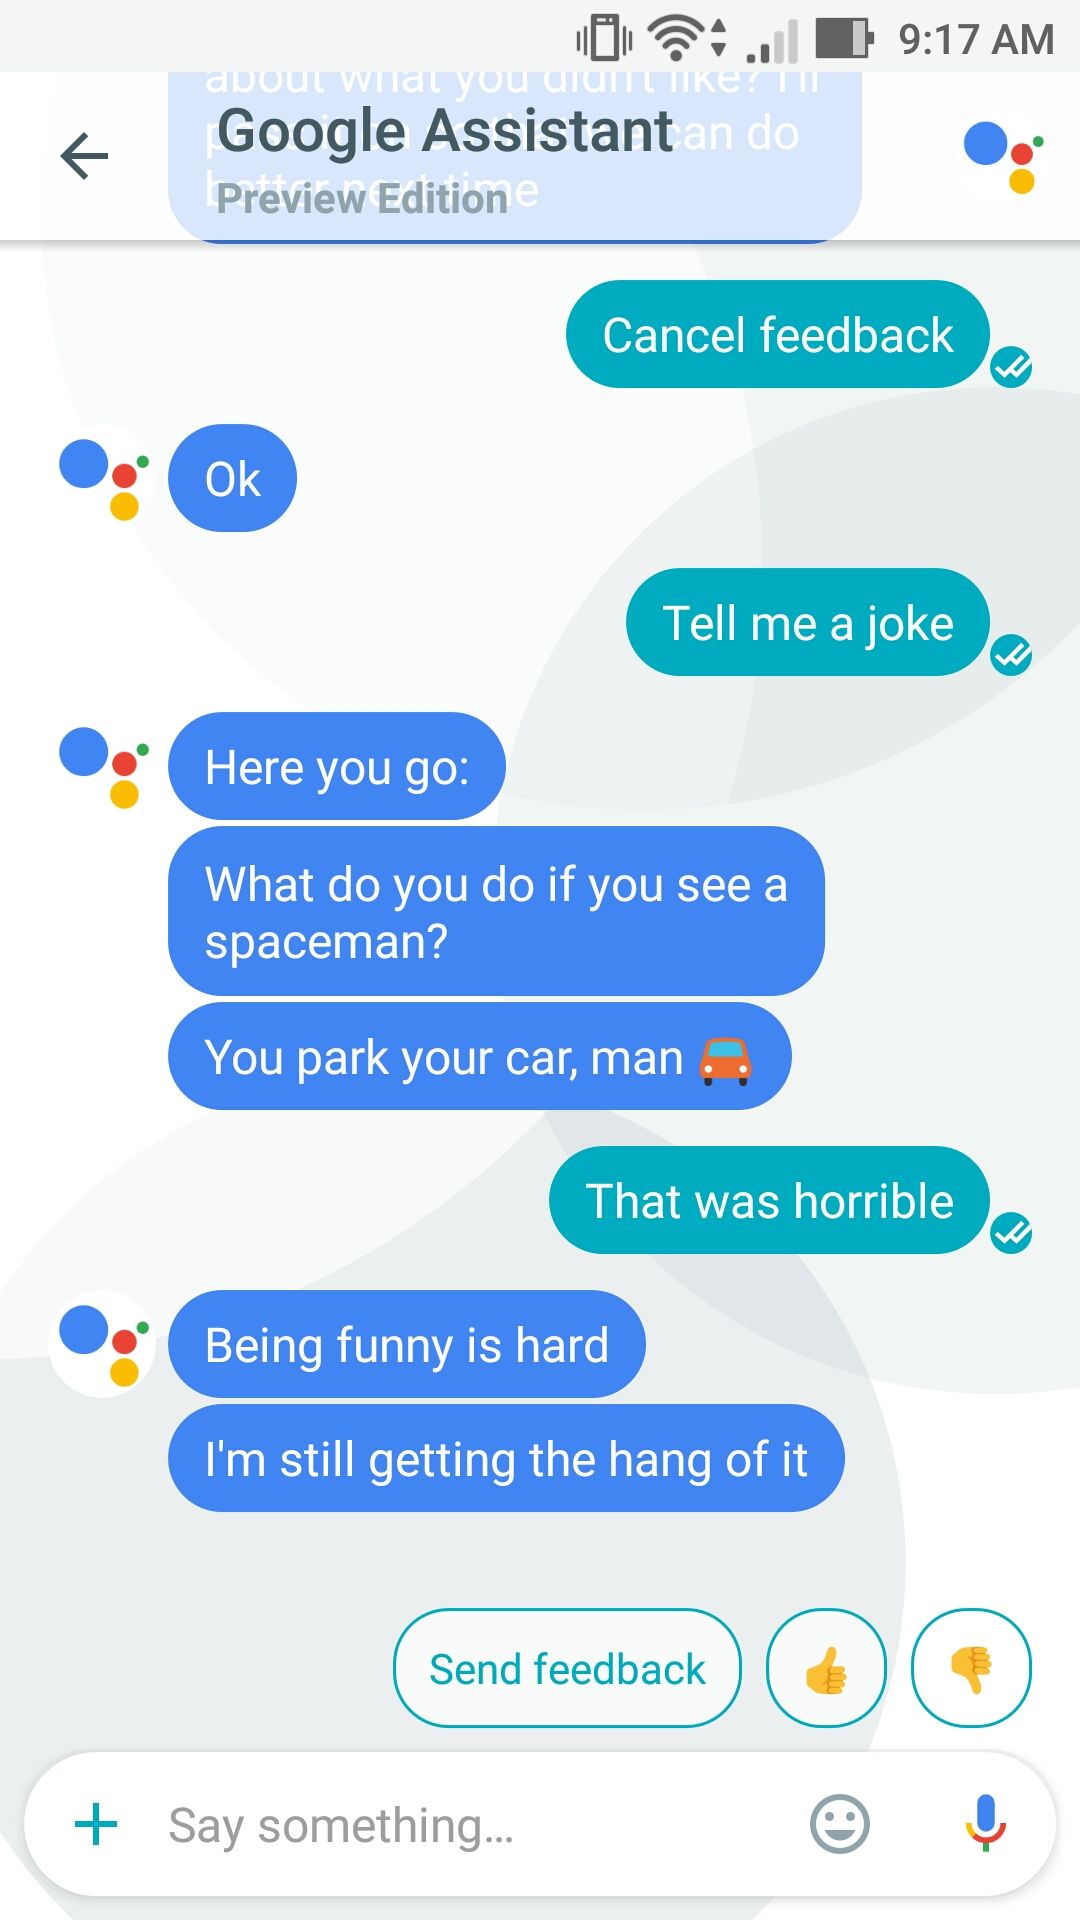 Google assistant is trying, but it's hard.